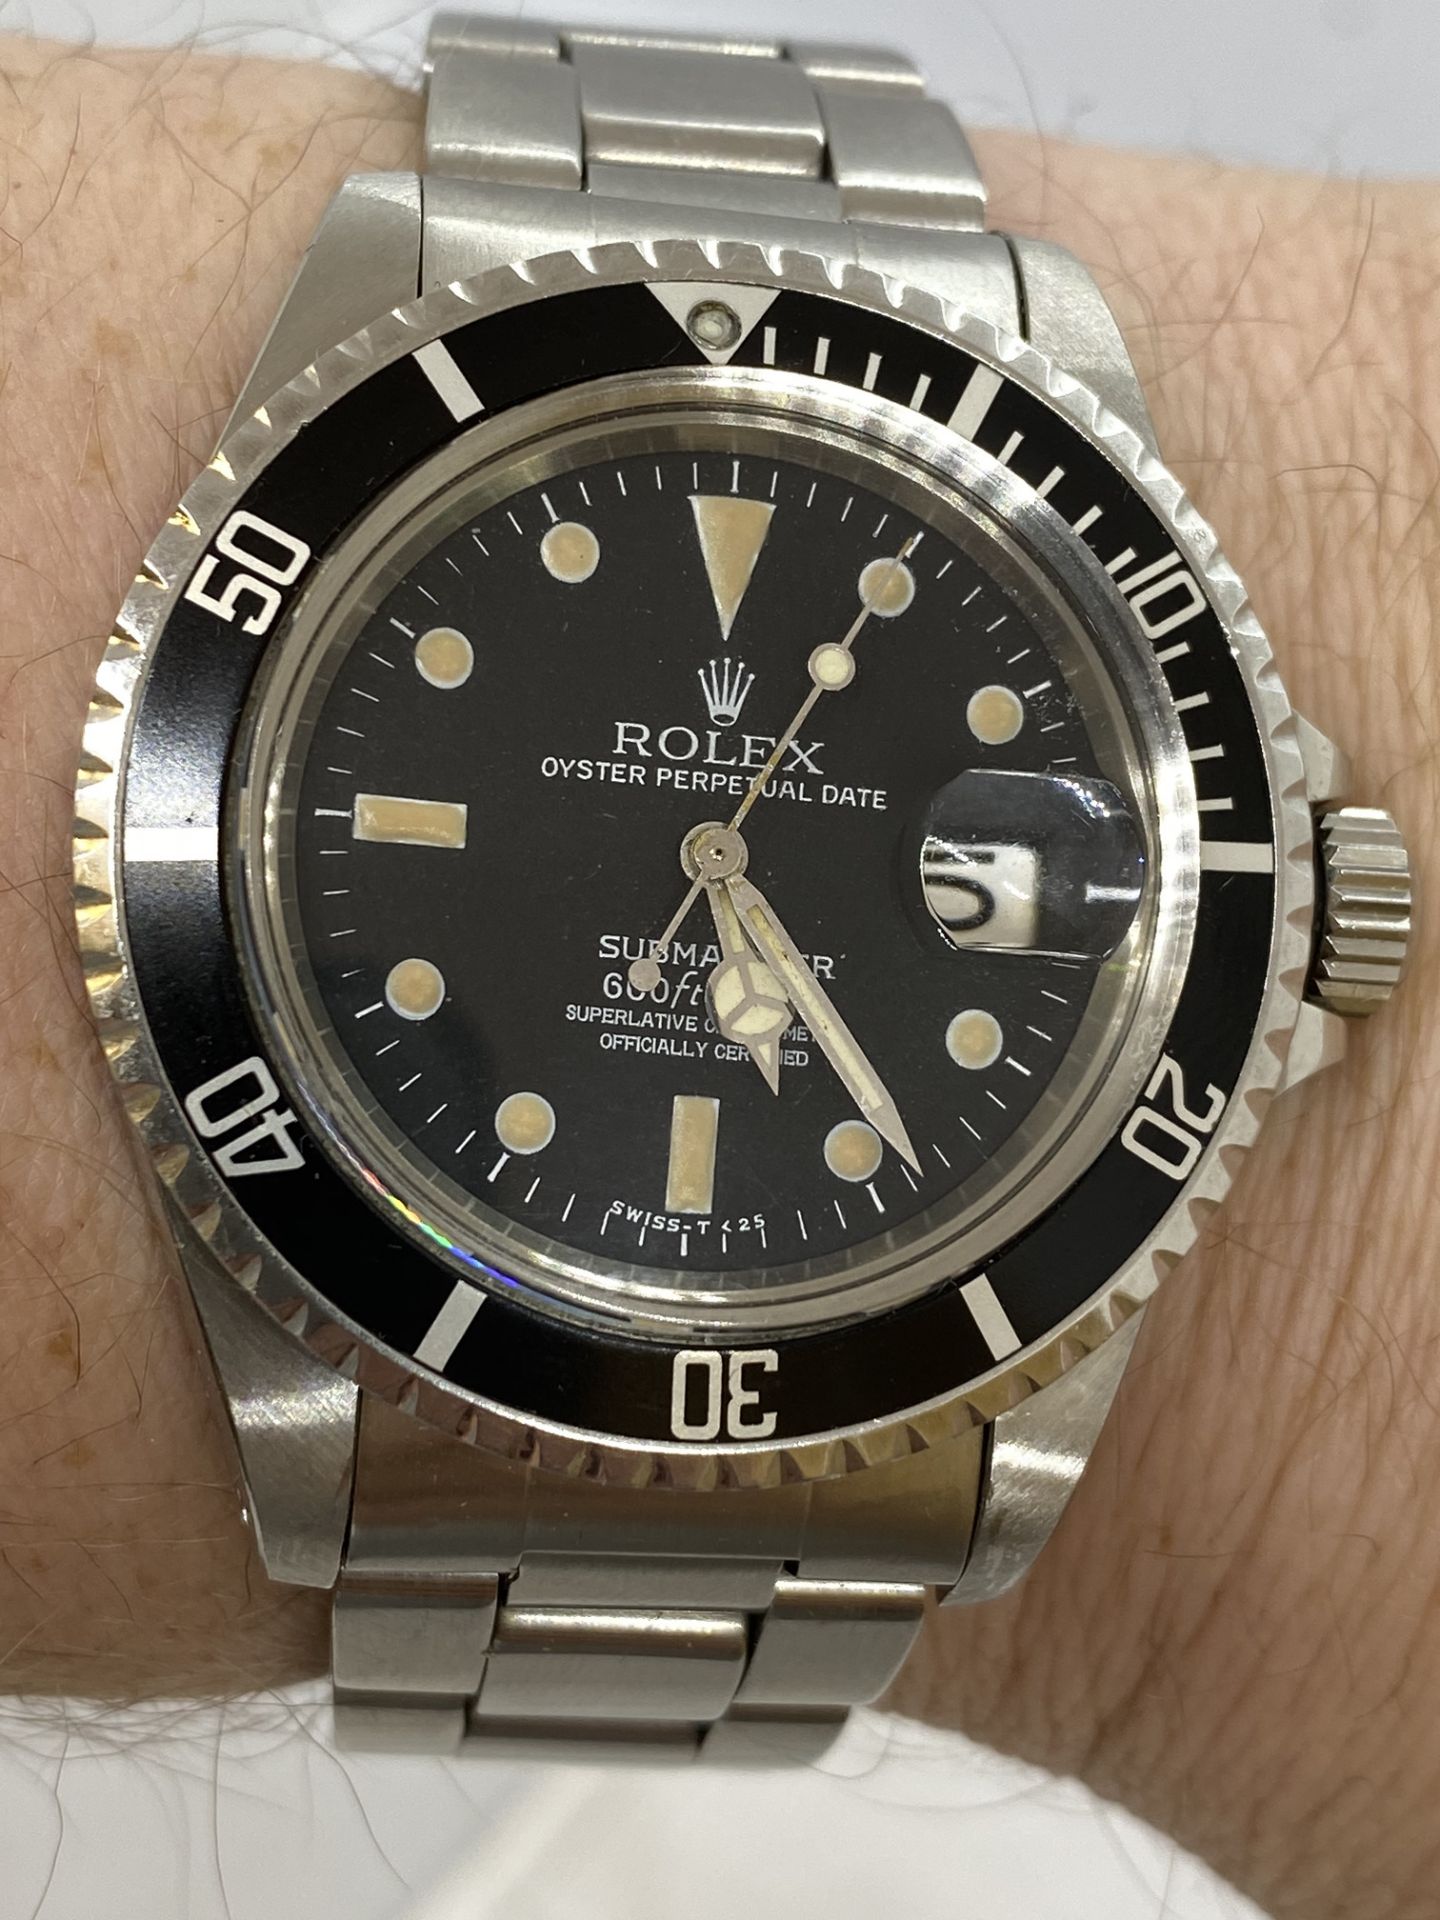 WATCH MARKED ROLEX SUBMARINER - MOVEMENT WARRANTED AS ROLEX - Image 17 of 28